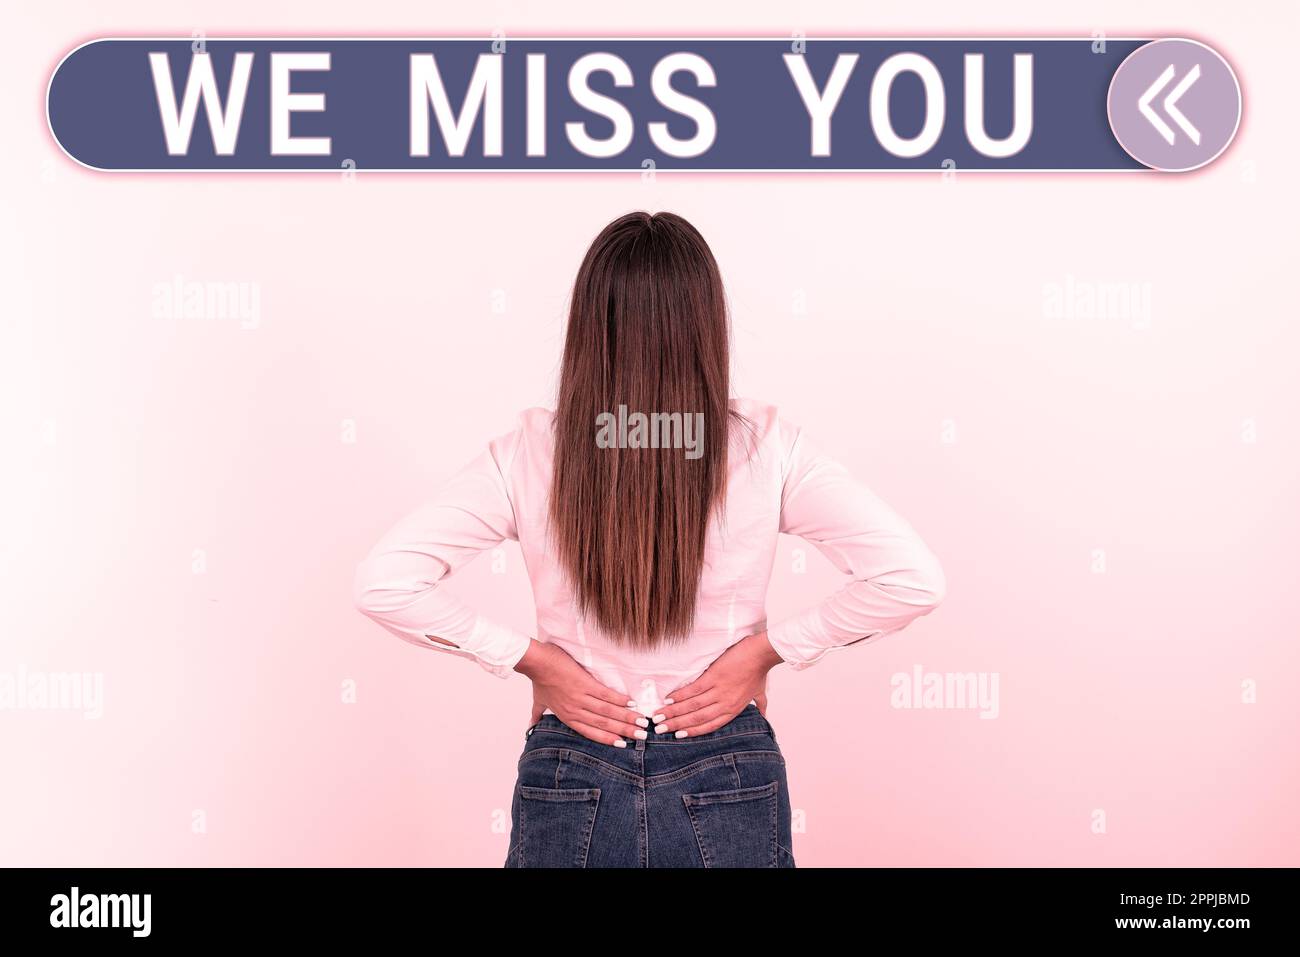 Sign displaying We Miss You. Business concept Feeling sad because you are not here anymore loving message Stock Photo